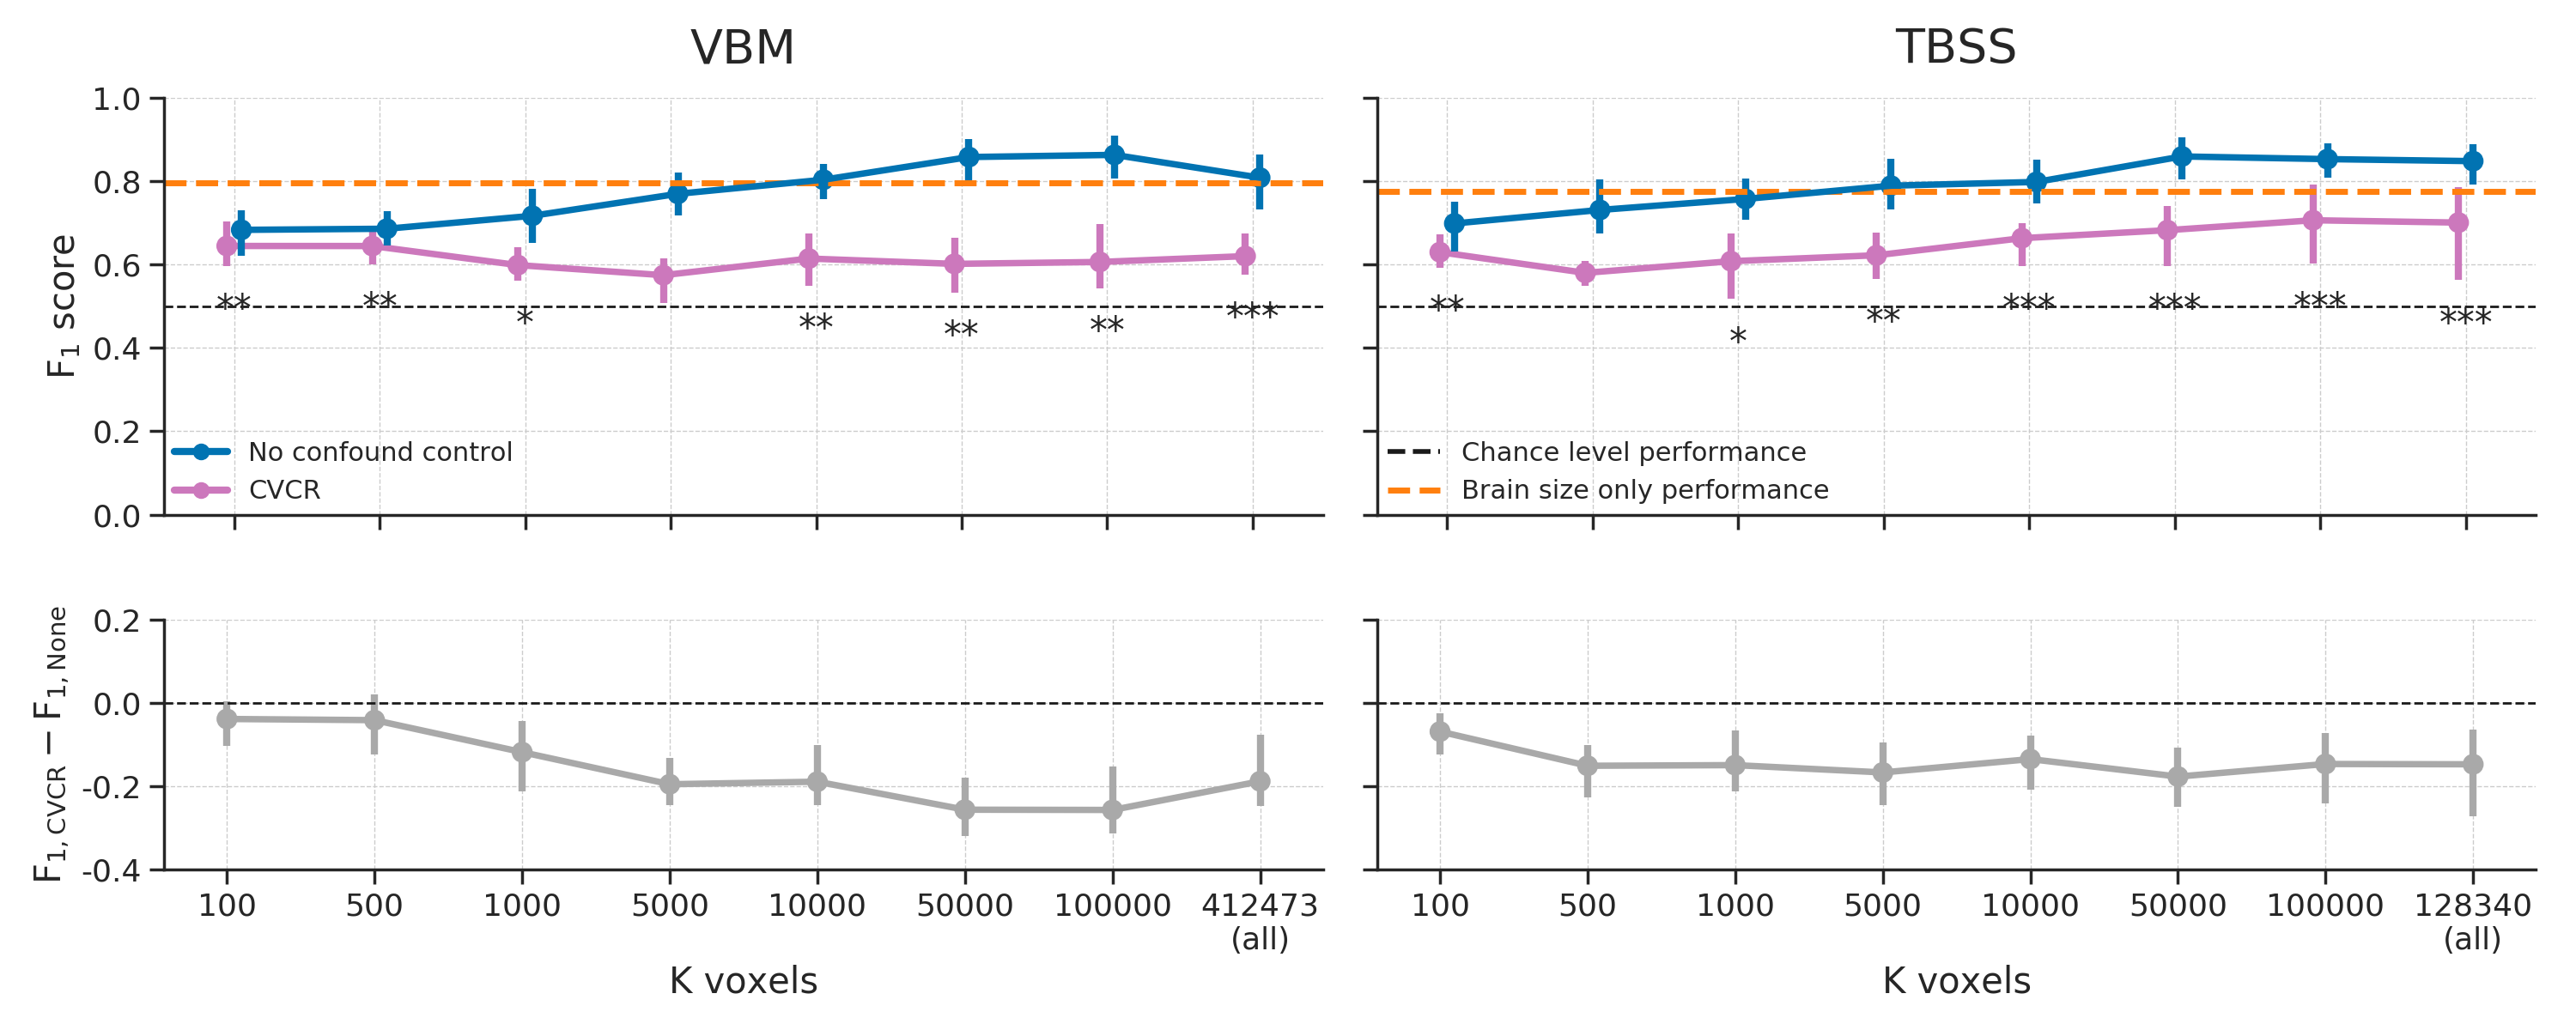 Model performance after CVCR (pink) versus the baseline performance (blue) for both the VBM (left) and TBSS (right) data. Performance reflects the average \(F_{1}\) score across 10 folds; error bars reflect 95% confidence intervals across 1000 bootstrap replications. The dashed black line reflect theoretical chance level performance (0.5) and the dashed orange line reflects the average model performance when only brain size is used as a predictor. Asterisks indicates performance of the CVCR model that is significantly above or below chance: *** = \(p < 0.001\), ** = \(p < 0.01\), * = \(p < 0.05\).